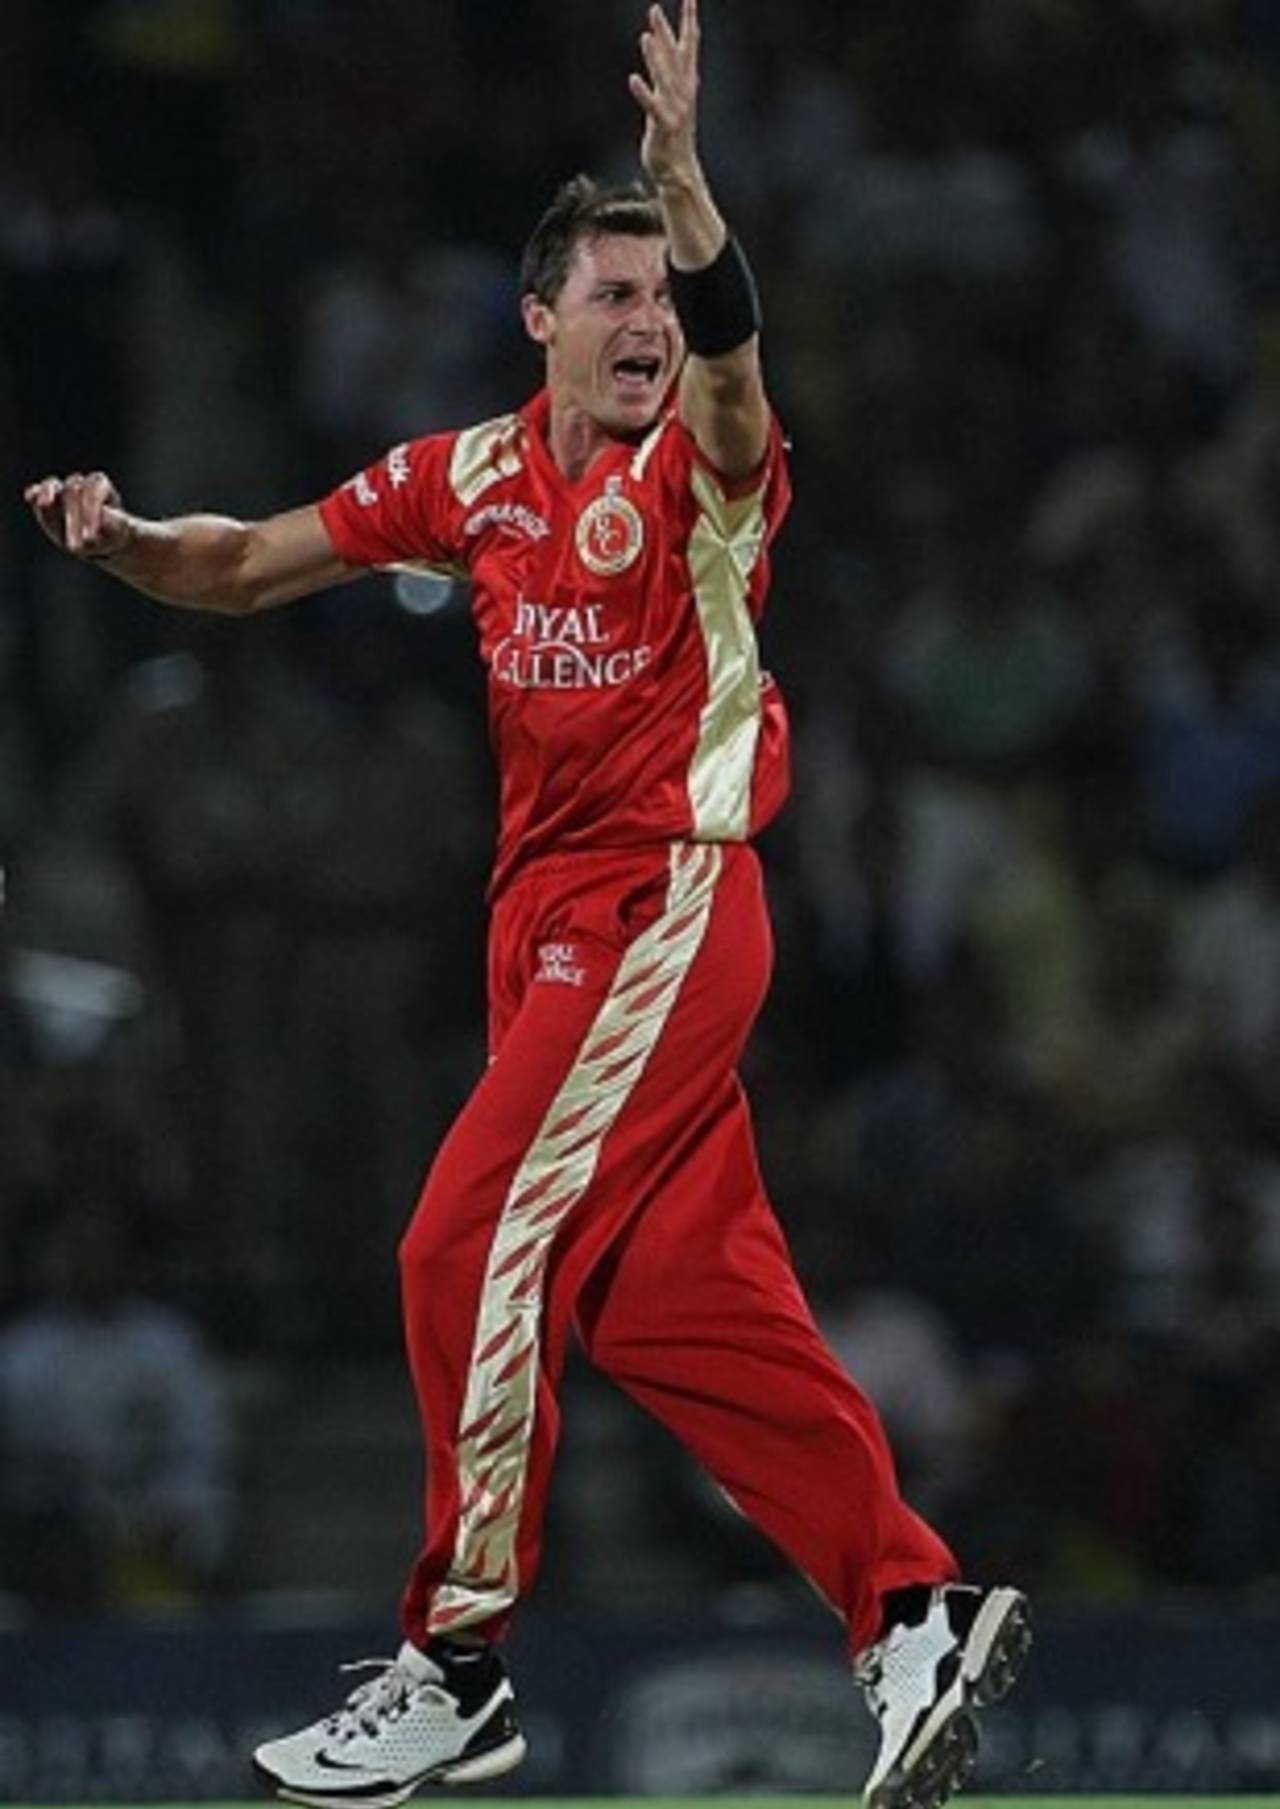 Dale Steyn picked up three early wickets, Deccan Chargers v Royal Challengers Bangalore, IPL, Nagpur, April 12, 2010